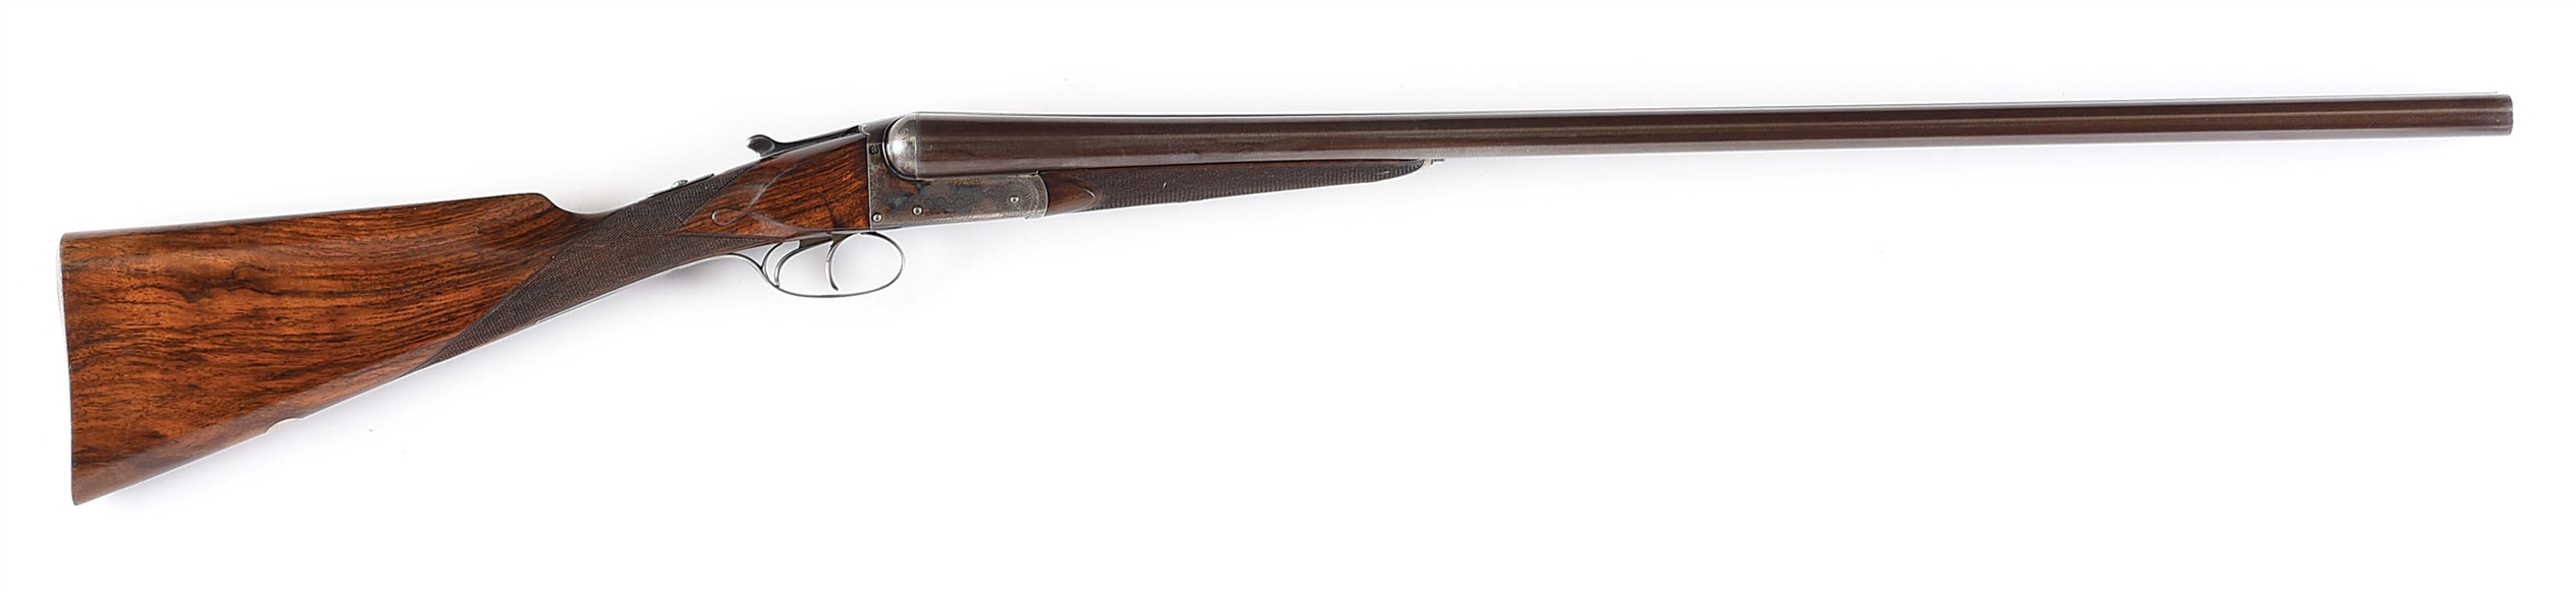 (A) RARE JAMES PURDEY & SONS "GRADE C" BOXLOCK GAME SHOTGUN INCORPORATING W. ANSON PATENT EJECTOR OF 1884/6 IN  CASE.